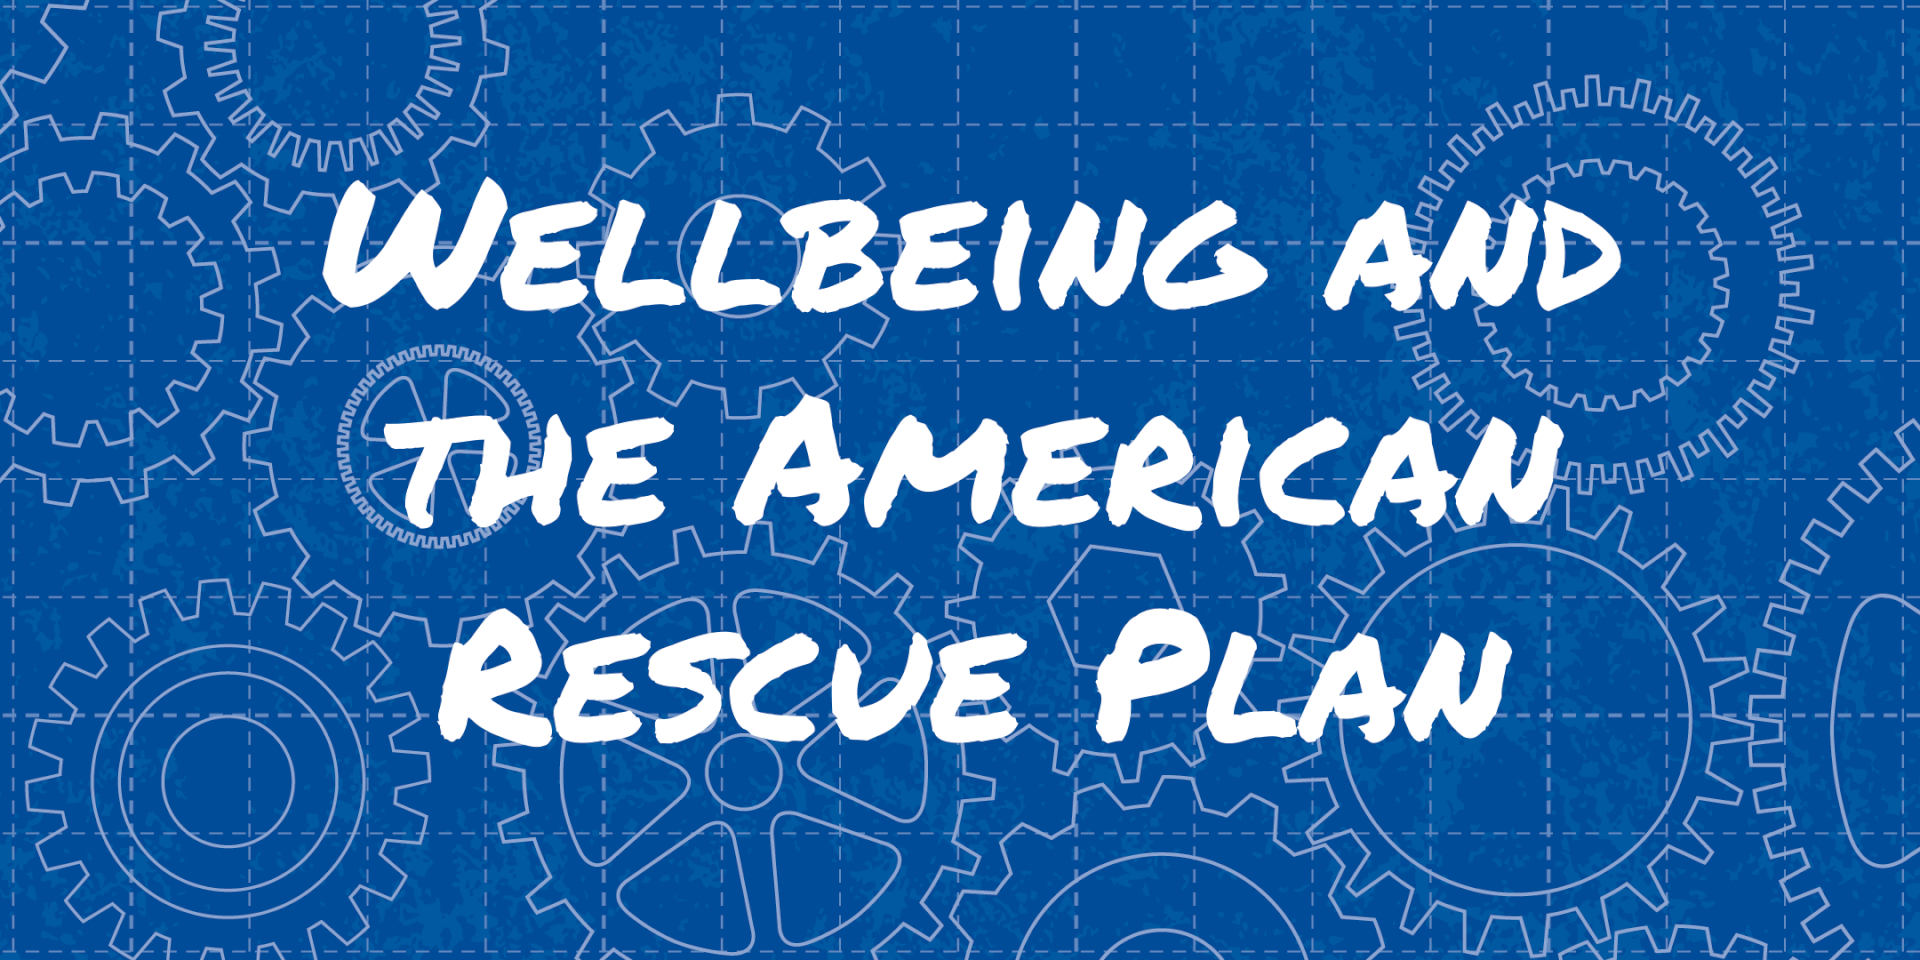 https://wellbeingblueprint.org/wp-content/uploads/2022/01/American_rescue.png